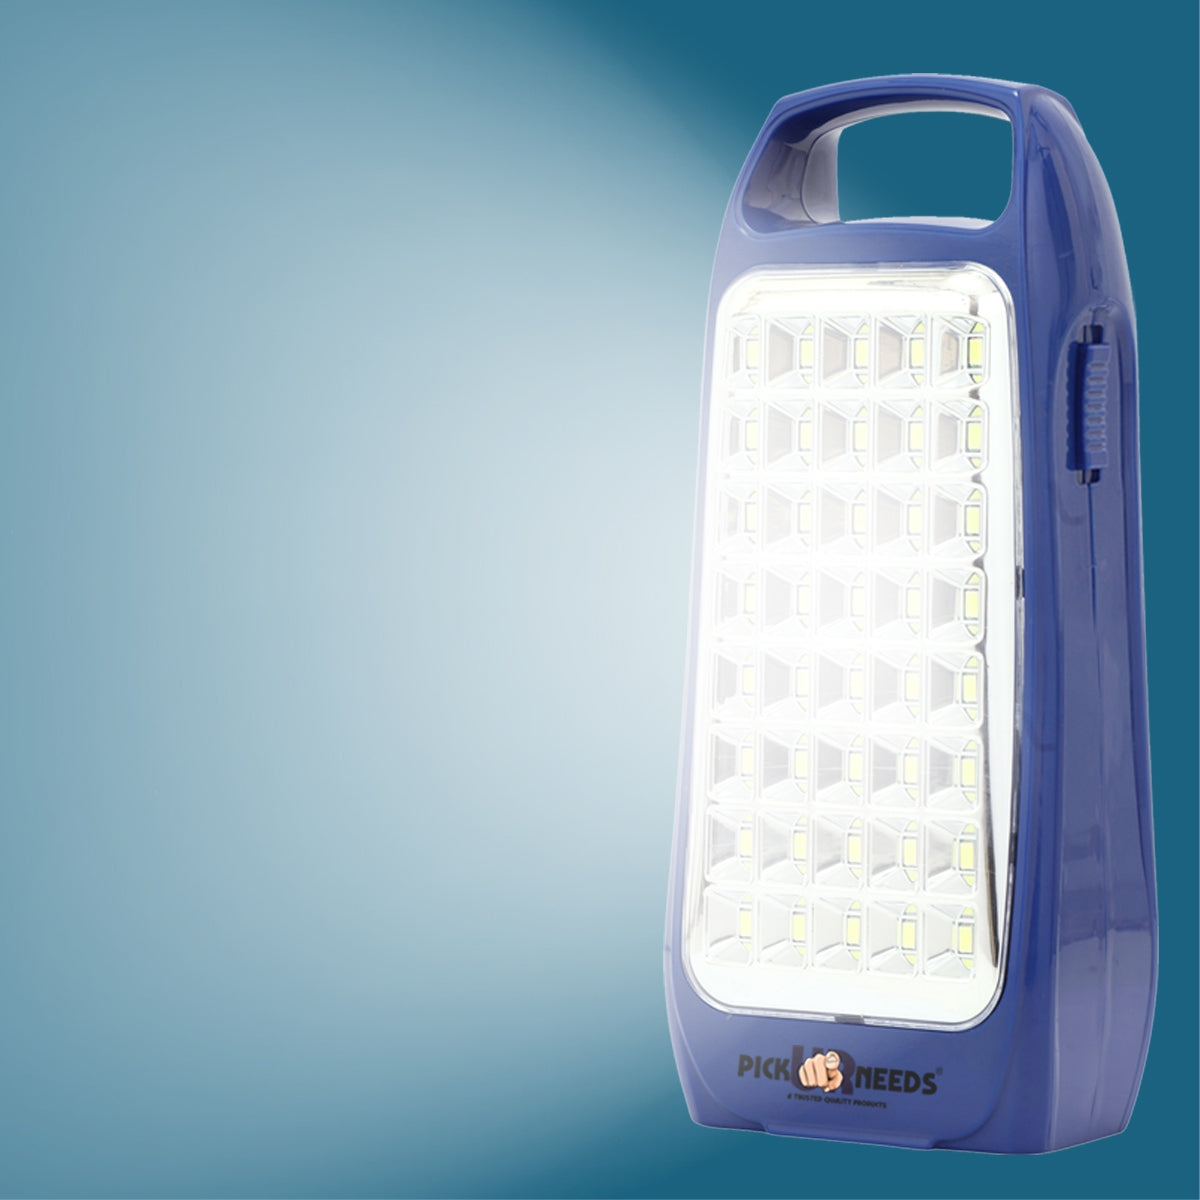 Pick Ur Needs Rechargeable & Portable Bright 40 SMD LED Lantern Lamp Home Emergency Light